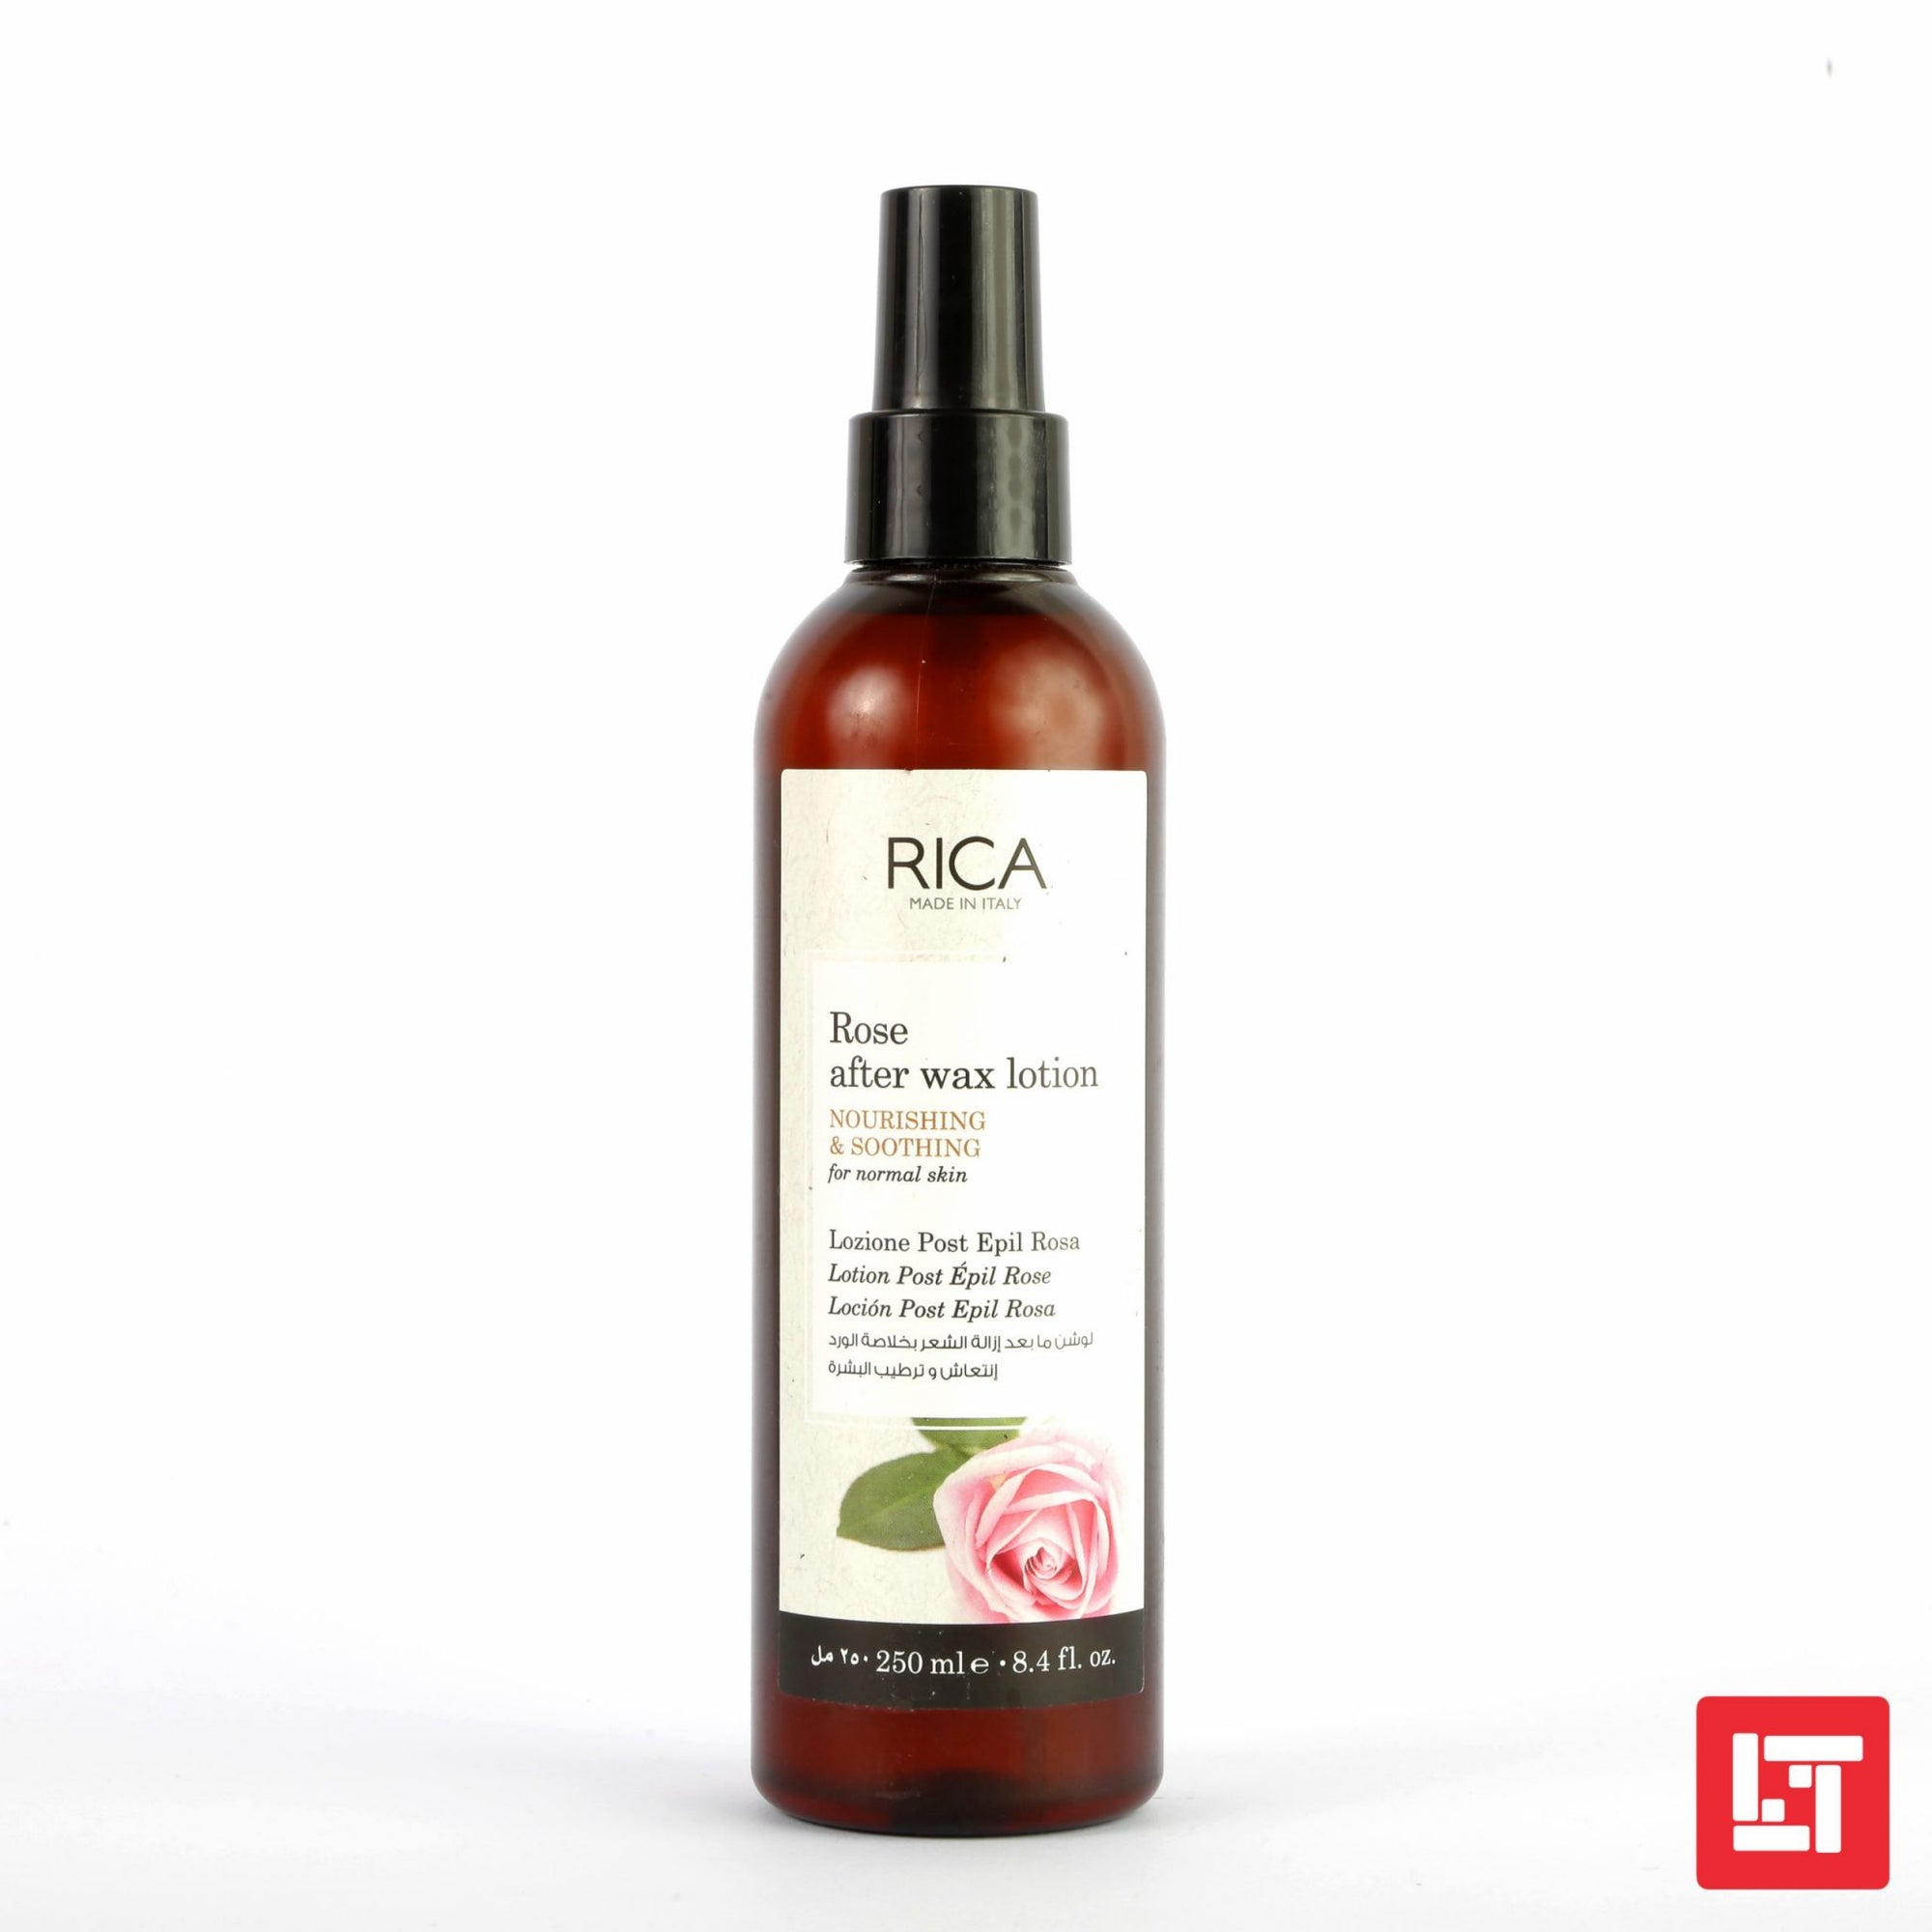 RICA Rose after Wax Lotion Nourishing & Soothing for Normal Skin 250ml freeshipping - lasertag.pk